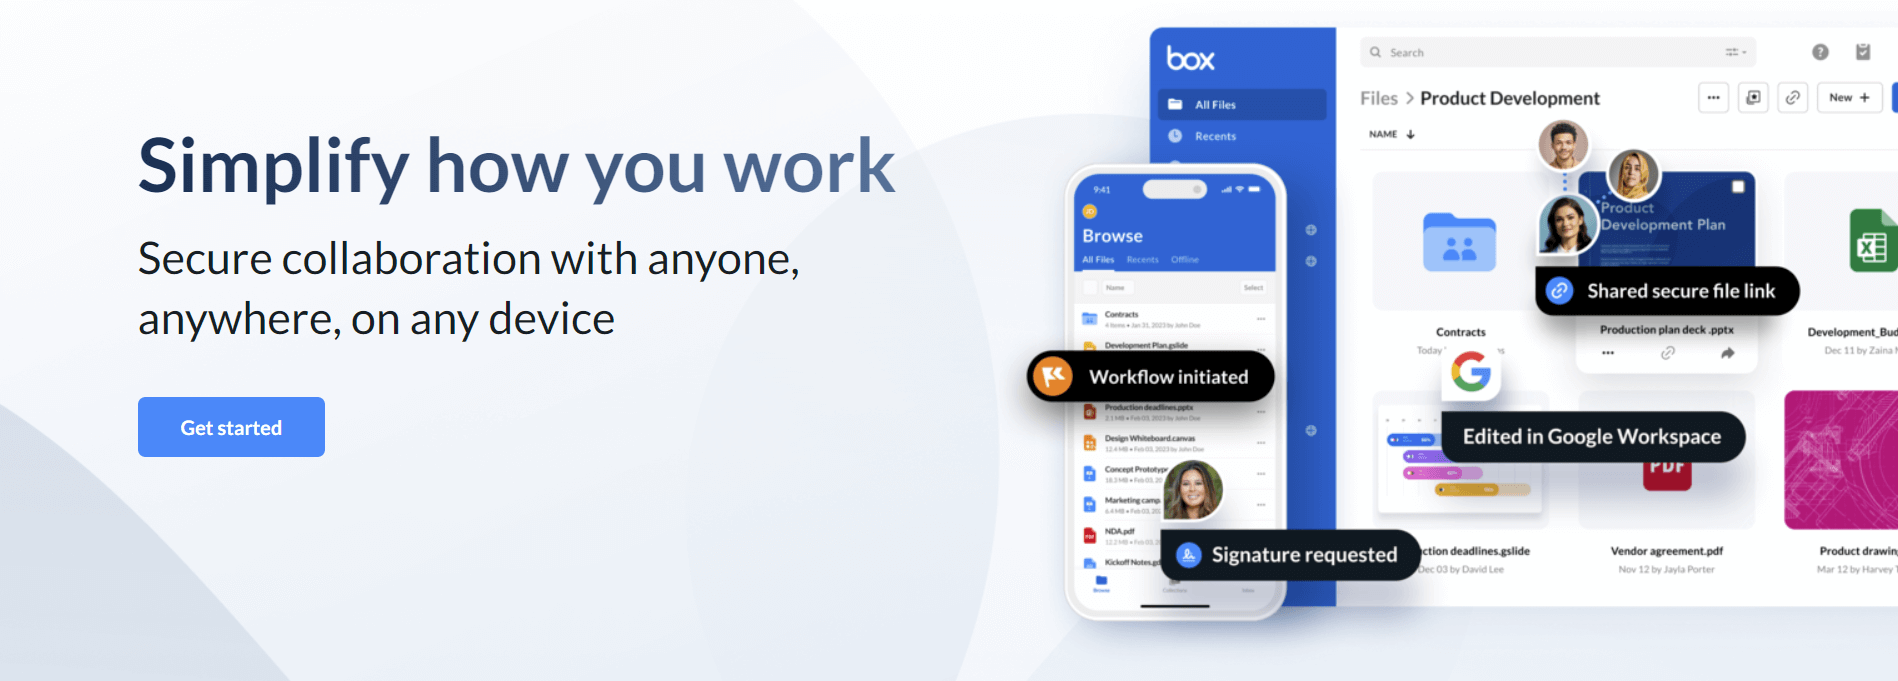 Box - Simplify how you work
